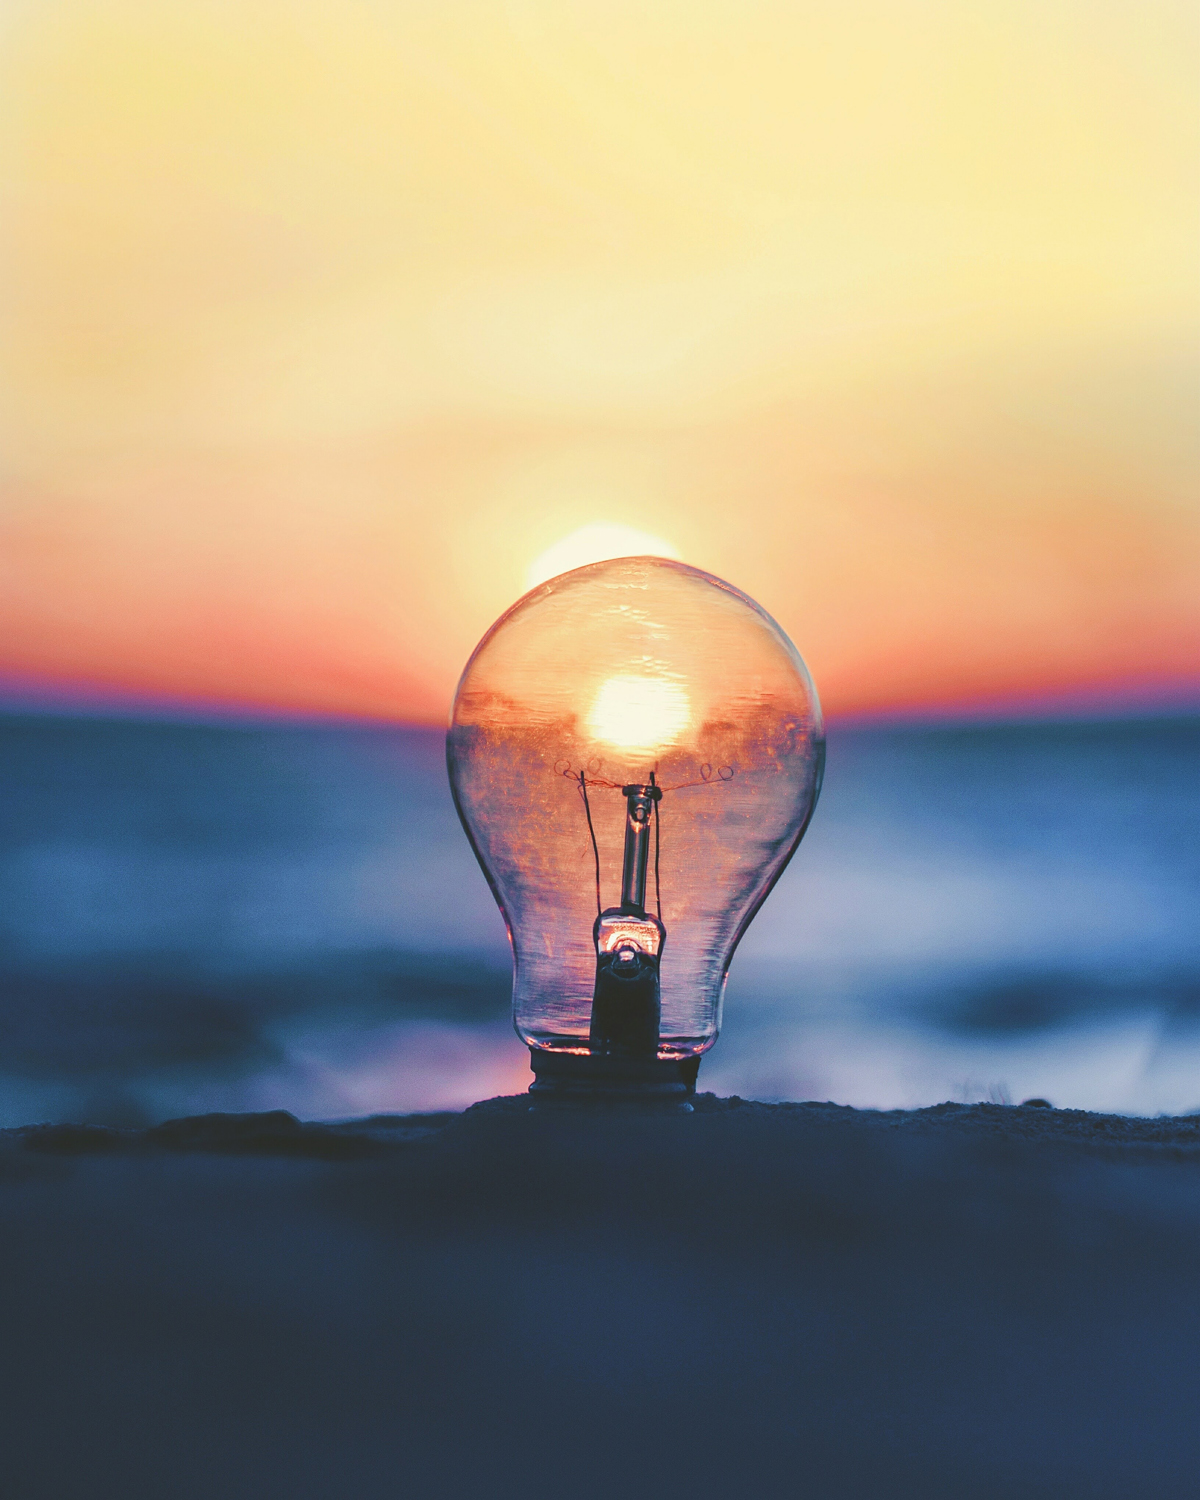 Lightbulb with Sunset, taken by Ameen Fahmy